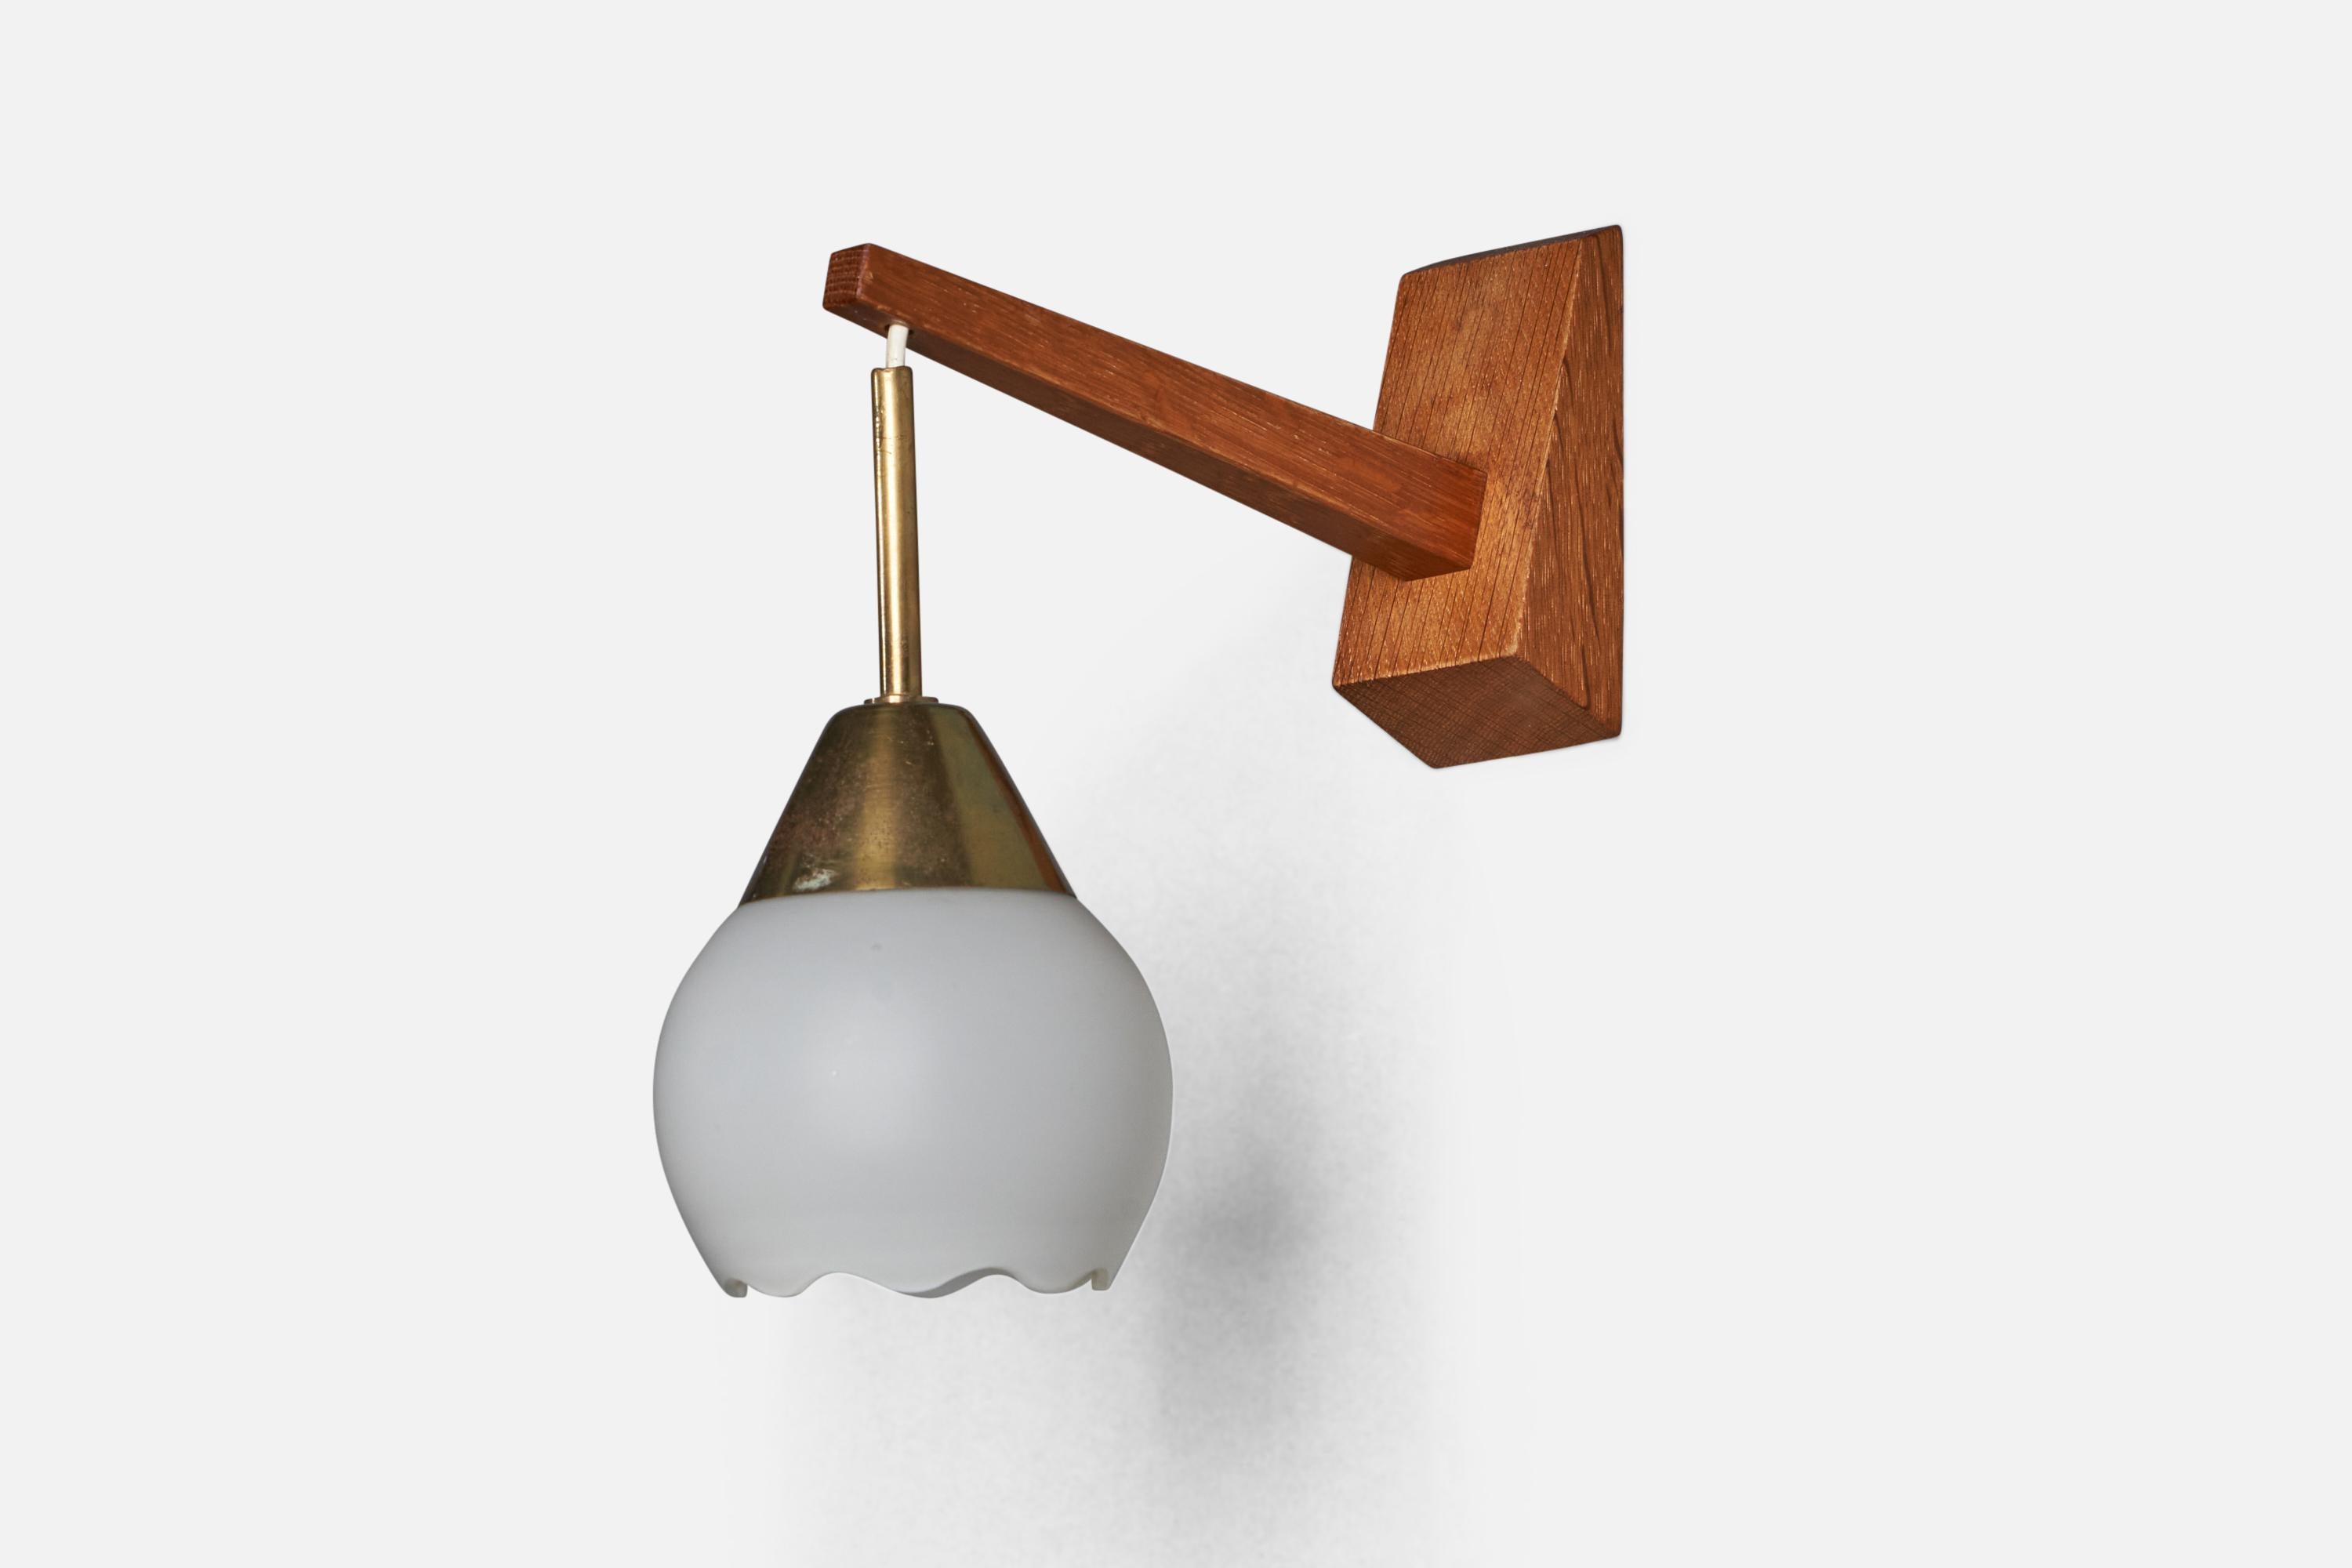 An adjustable teak, brass and opaline glass wall light designed and produced in Sweden, 1940s.

Overall Dimensions (inches): 10” H x 3.75” W x 9” D
Back Plate Dimensions (inches): 4” H x 2.15” W x 1” D
Bulb Specifications: E-26 Bulb
Number of